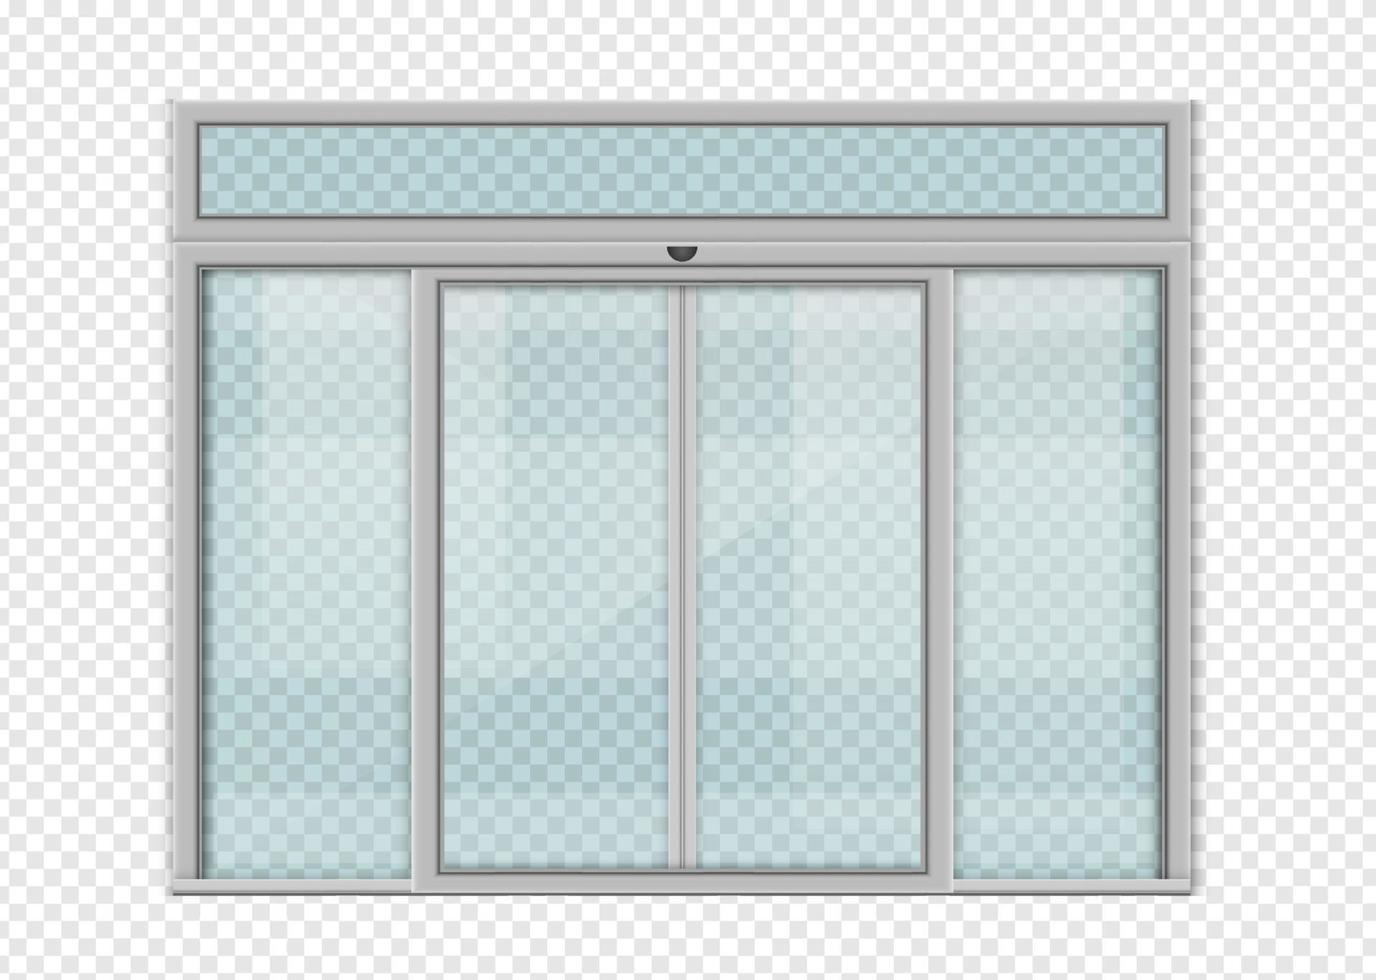 Double sliding glass doors to the office, train station, supermarket with space. vector design.